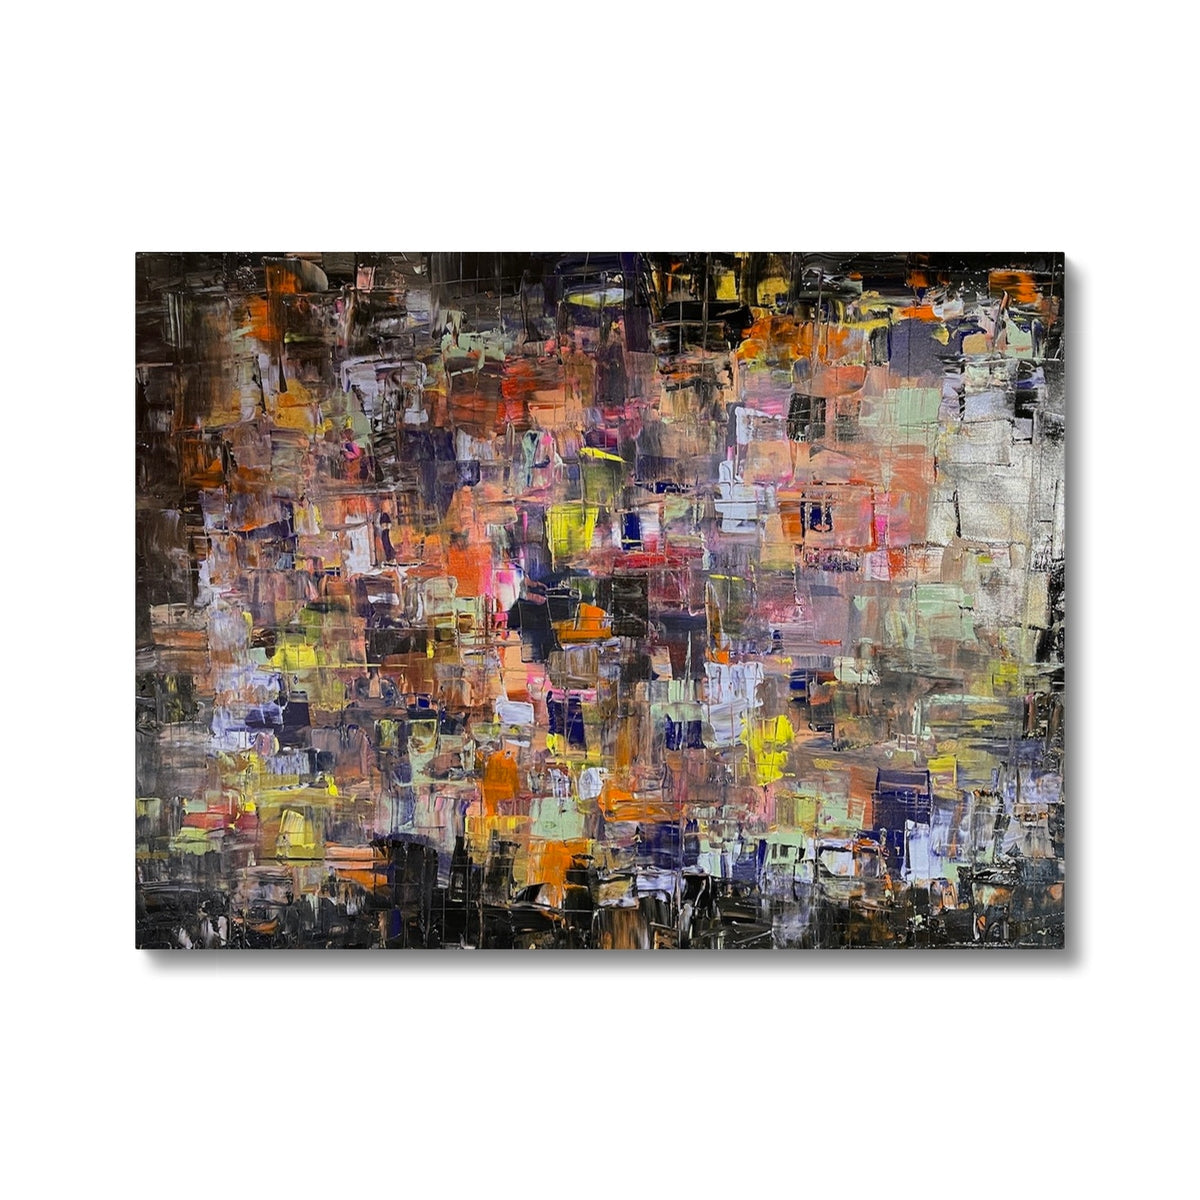 Never Enough Abstract Painting | Canvas From Scotland-Contemporary Stretched Canvas Prints-Abstract & Impressionistic Art Gallery-24"x18"-Paintings, Prints, Homeware, Art Gifts From Scotland By Scottish Artist Kevin Hunter